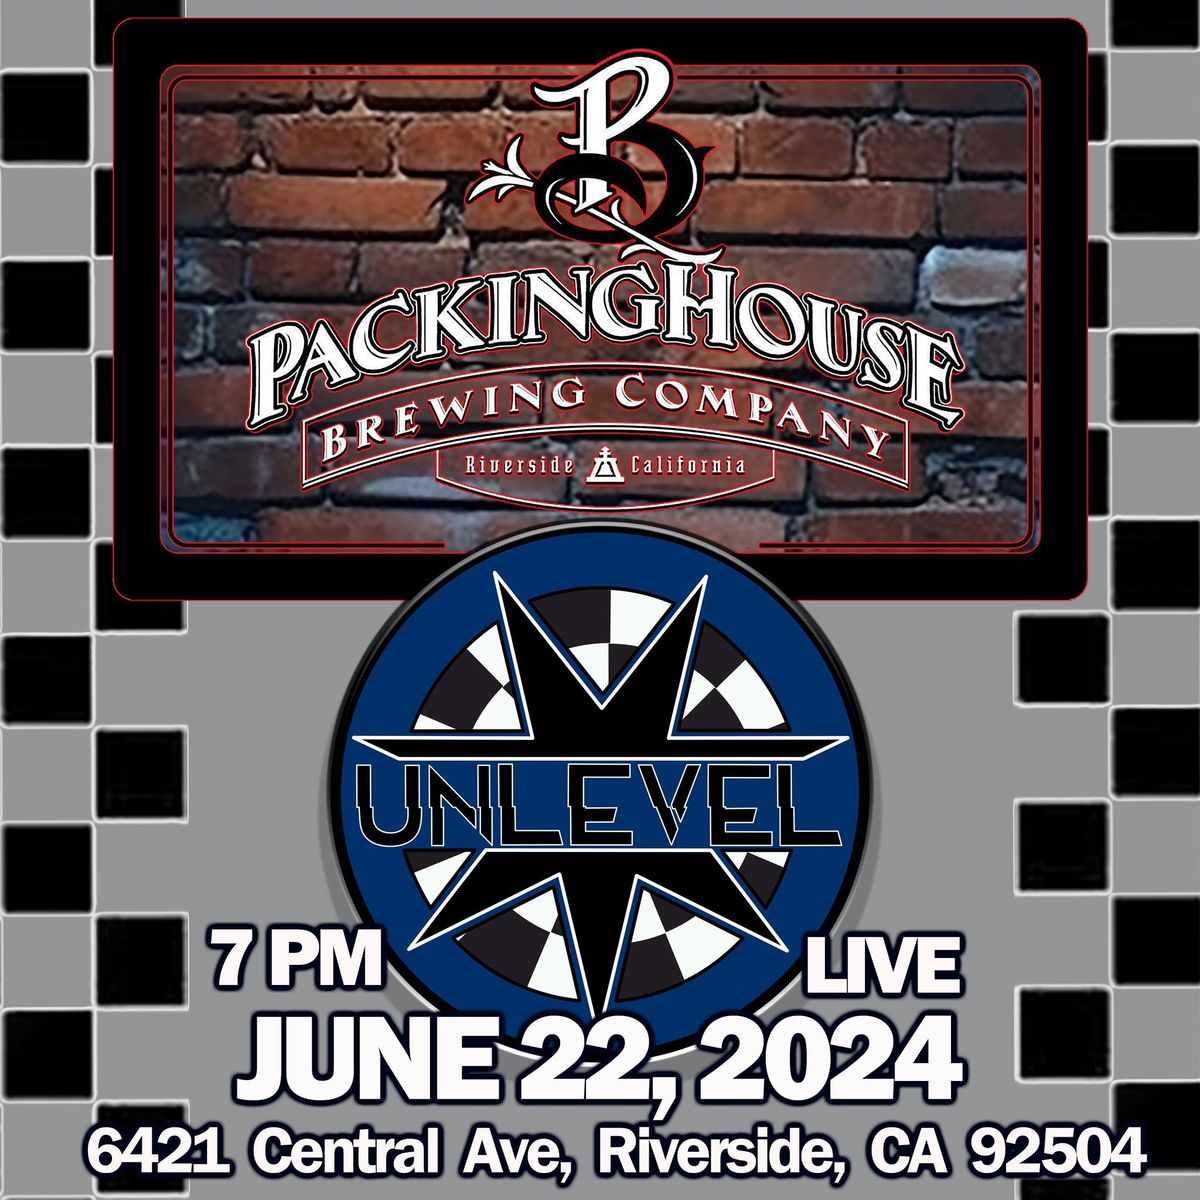 UNLEVEL live at the Packinghouse Brewery